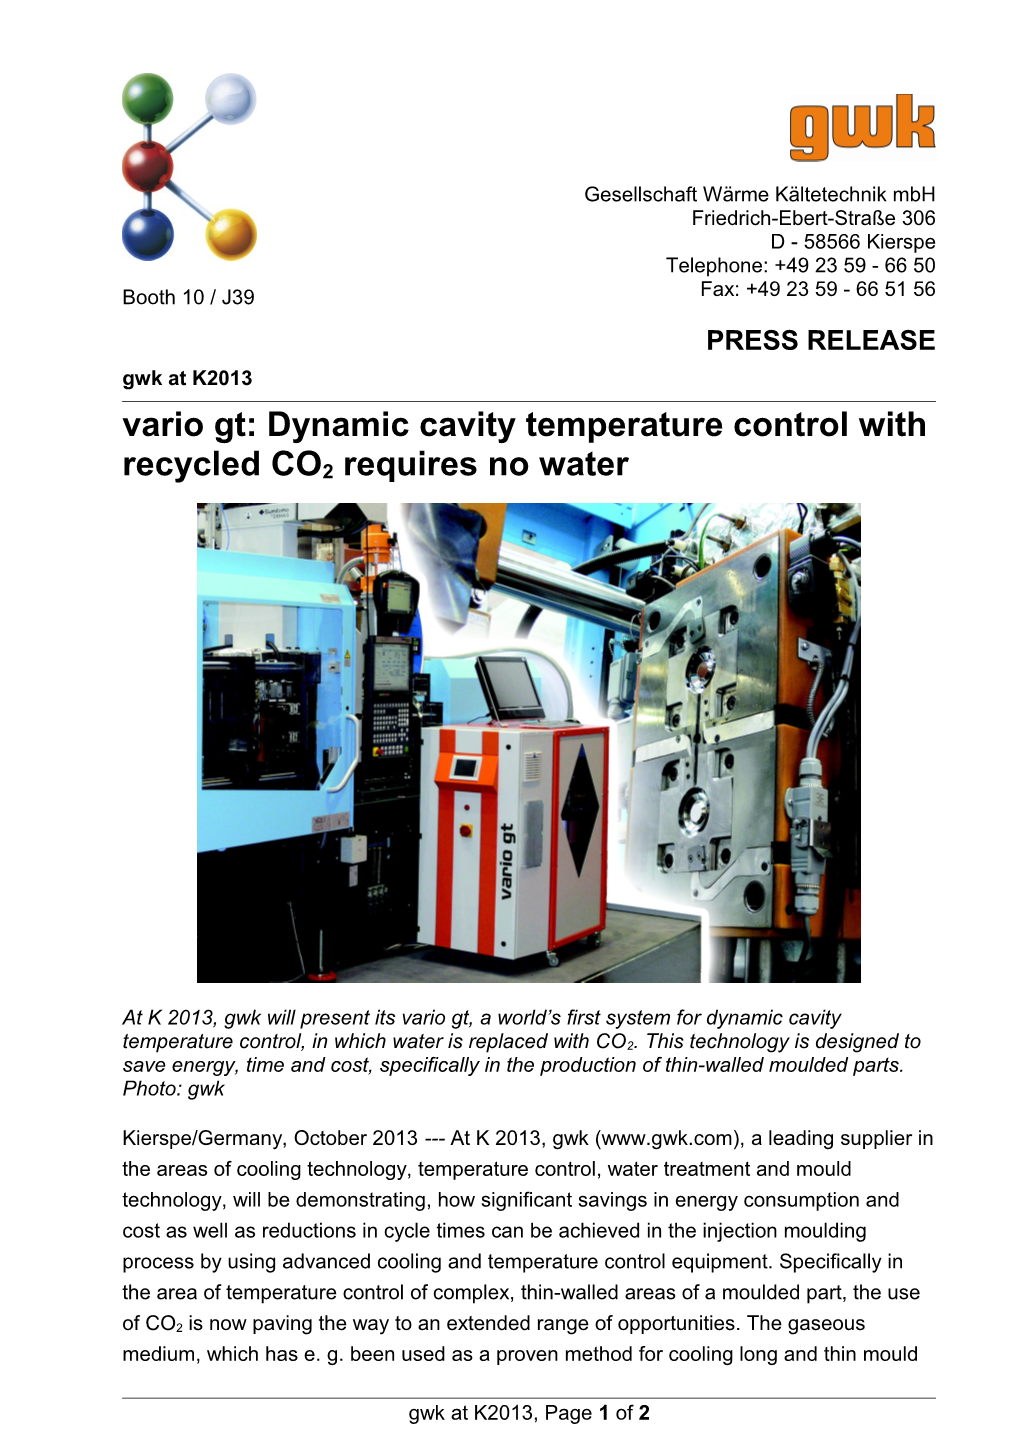 Vario Gt: Dynamic Cavity Temperature Control with Recycled CO2 Requires No Water